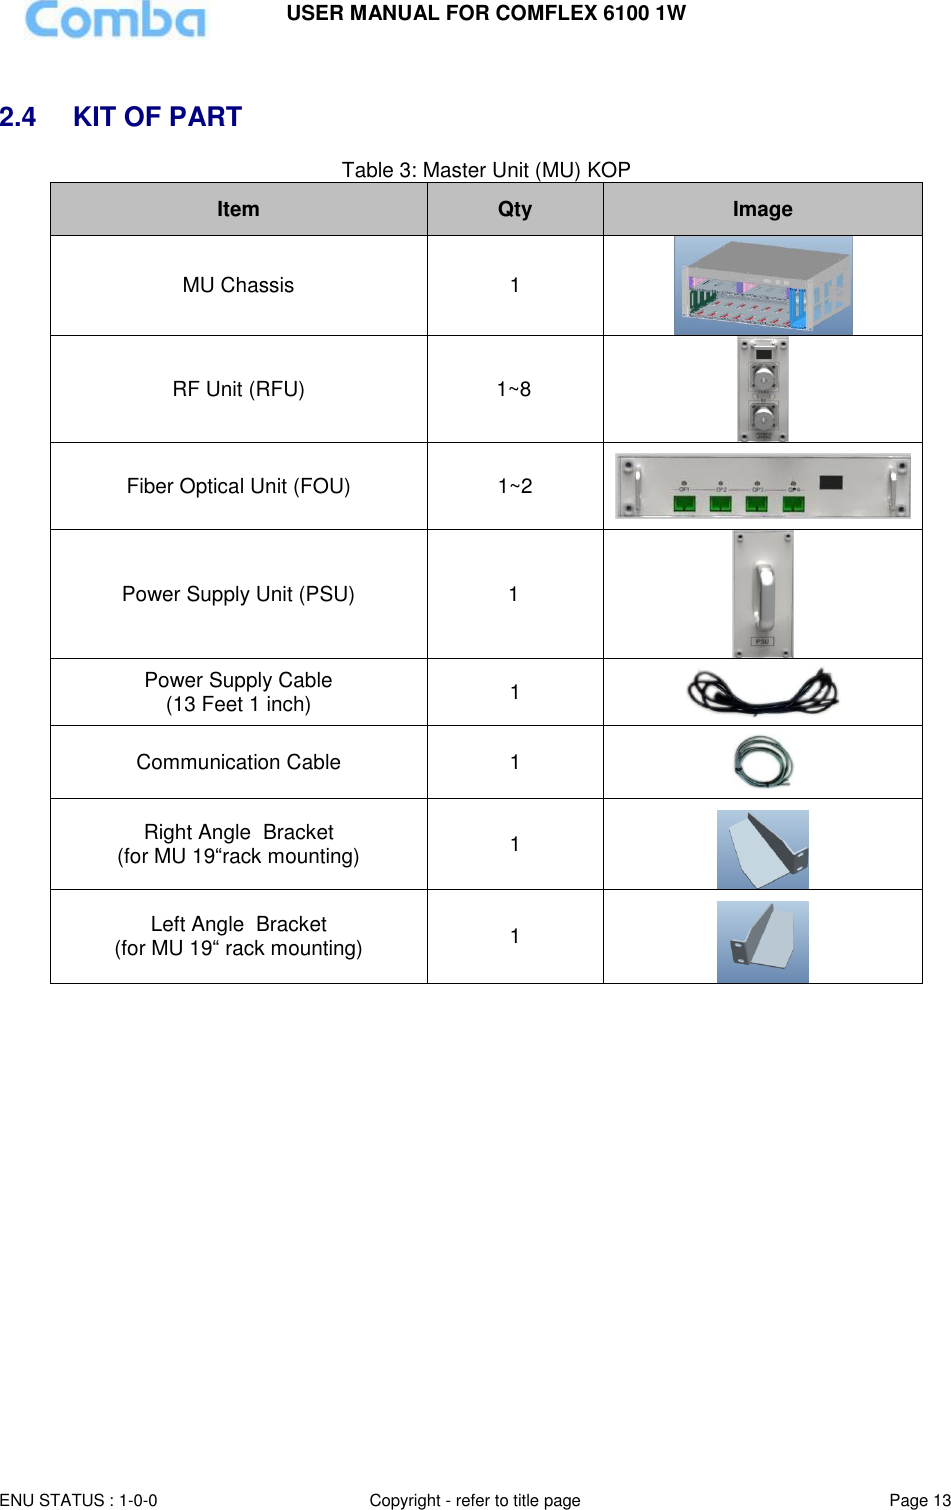 USER MANUAL FOR COMFLEX 6100 1W ENU STATUS : 1-0-0 Copyright - refer to title page Page 13   2.4 KIT OF PART Table 3: Master Unit (MU) KOP Item Qty Image MU Chassis 1  RF Unit (RFU) 1~8  Fiber Optical Unit (FOU) 1~2  Power Supply Unit (PSU) 1  Power Supply Cable (13 Feet 1 inch) 1  Communication Cable 1  Right Angle  Bracket (for MU 19“rack mounting) 1   Left Angle  Bracket (for MU 19“ rack mounting) 1    